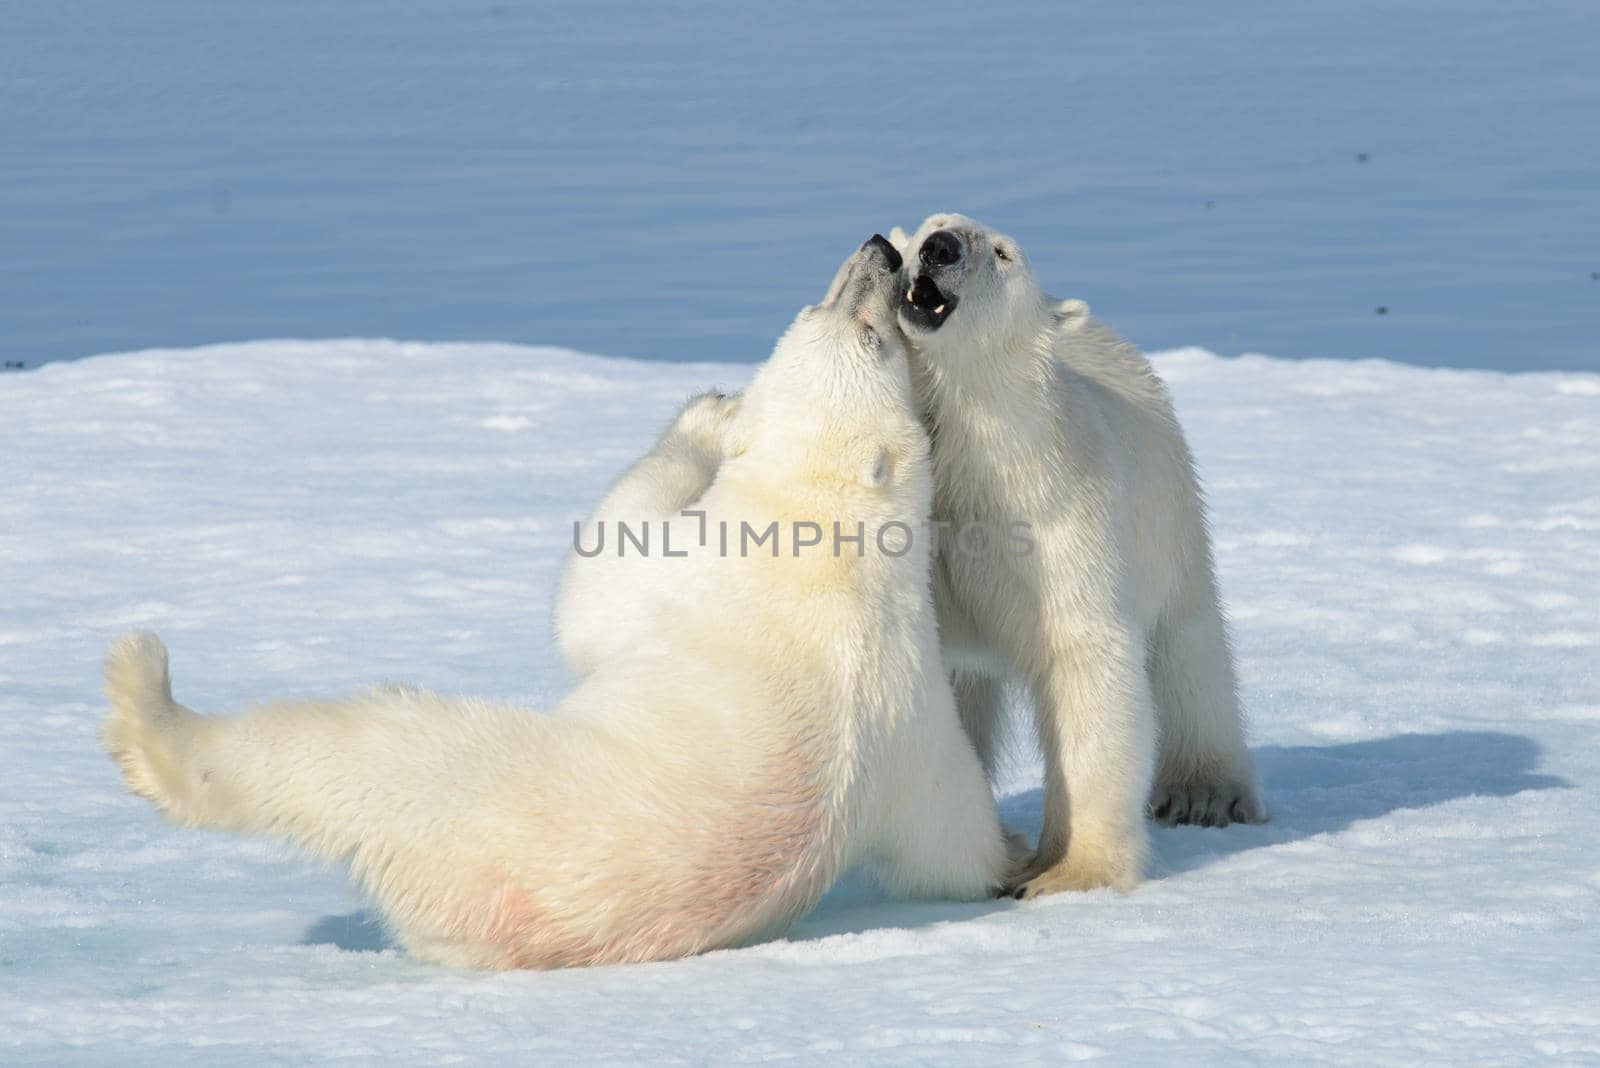 Two polar bear cubs playing together on the ice north of Svalbard